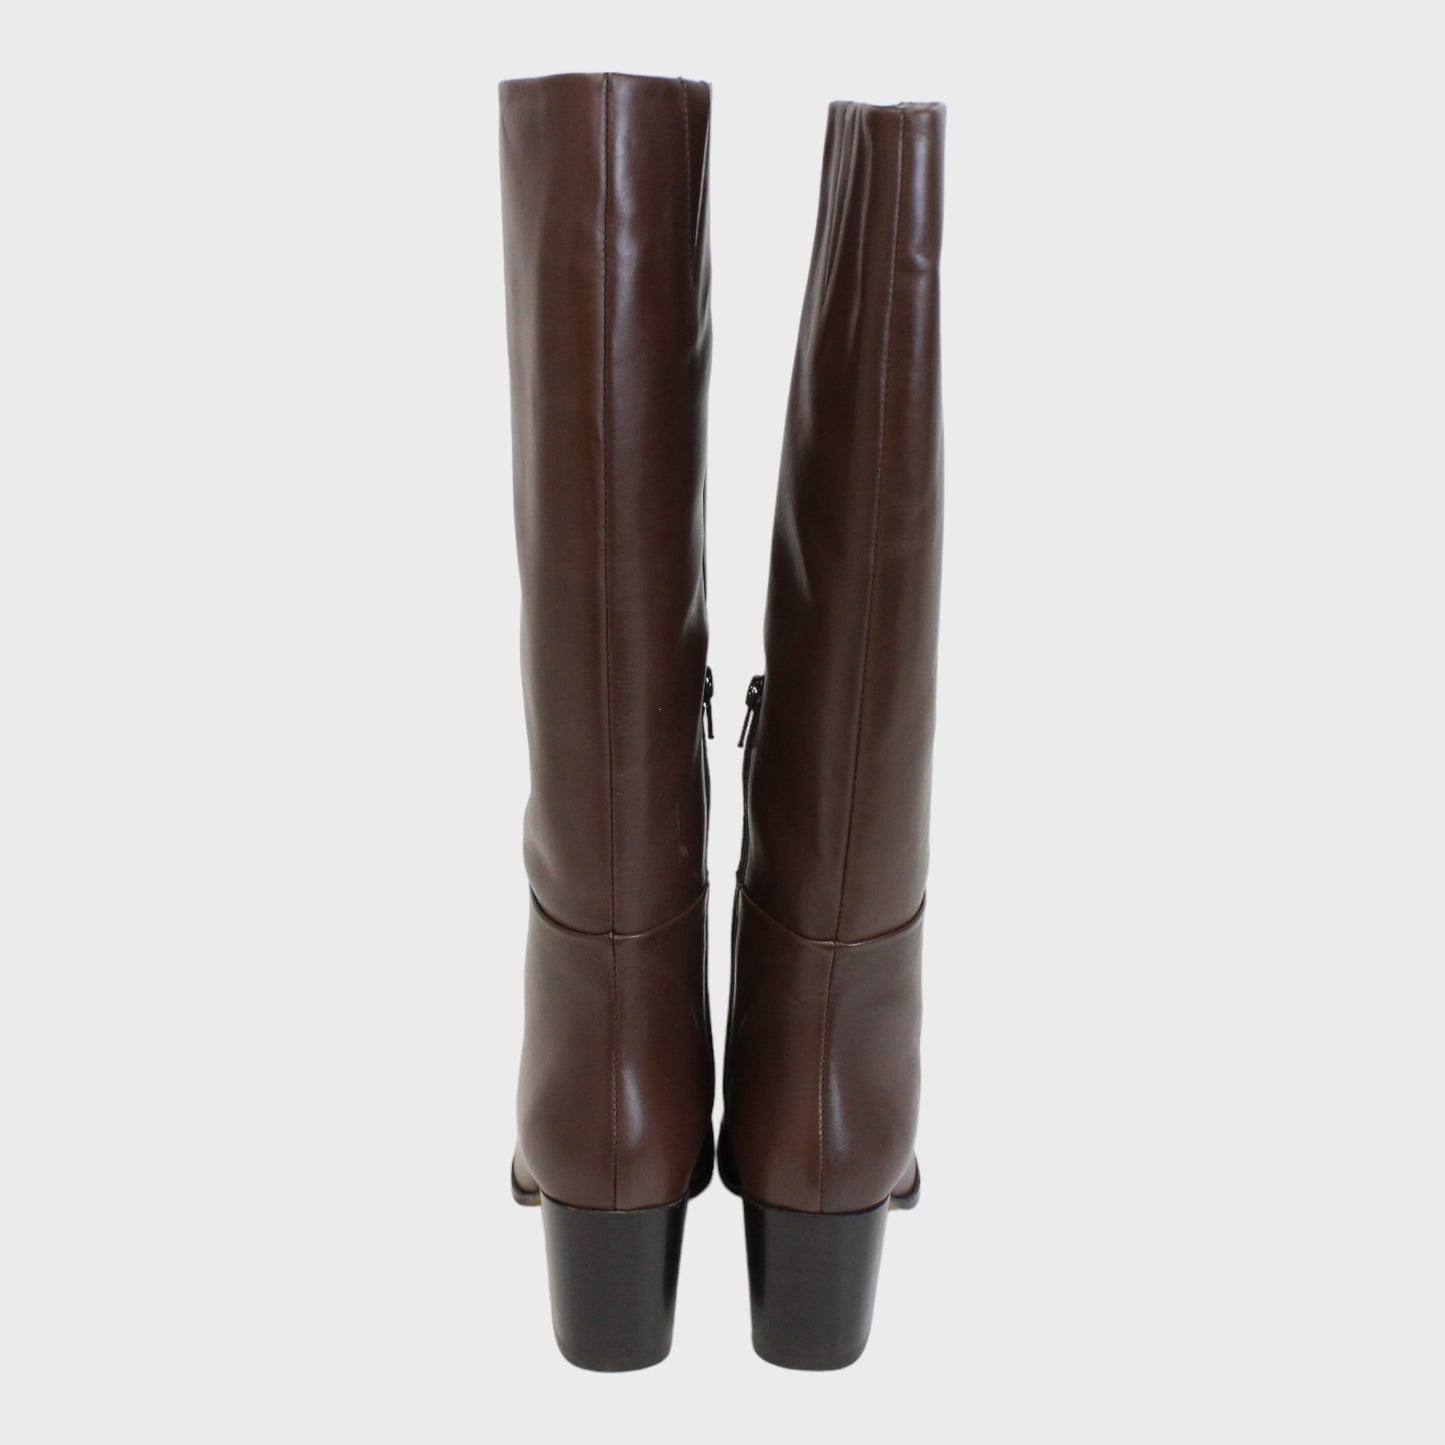 Women's Heeled Knee High Boots Leather Tan/Chocolate with Zip